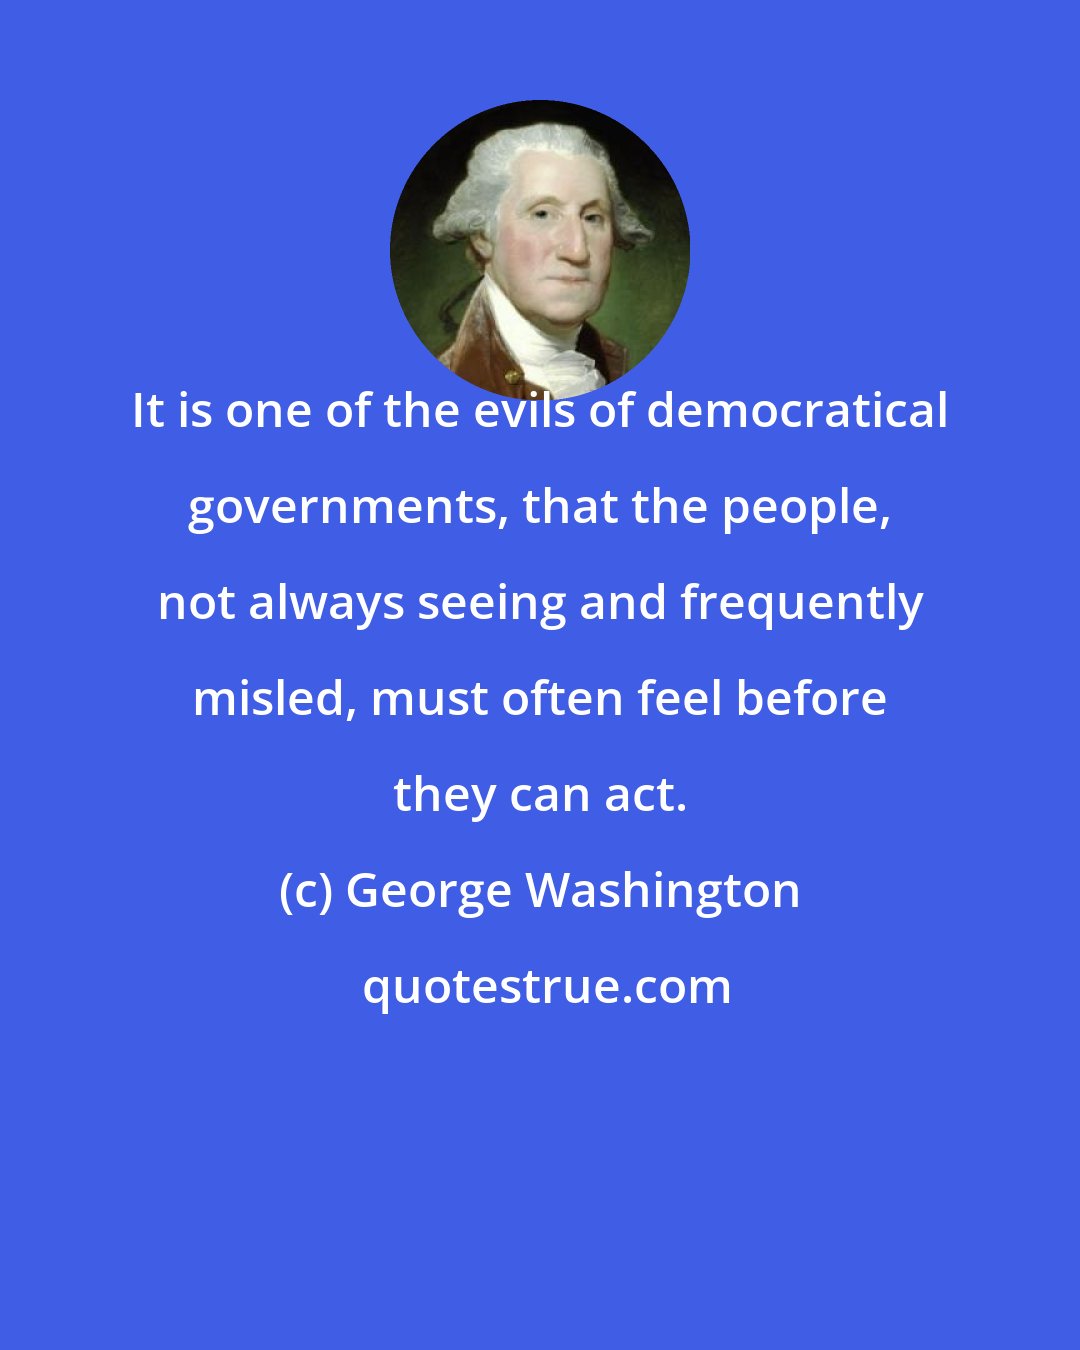 George Washington: It is one of the evils of democratical governments, that the people, not always seeing and frequently misled, must often feel before they can act.